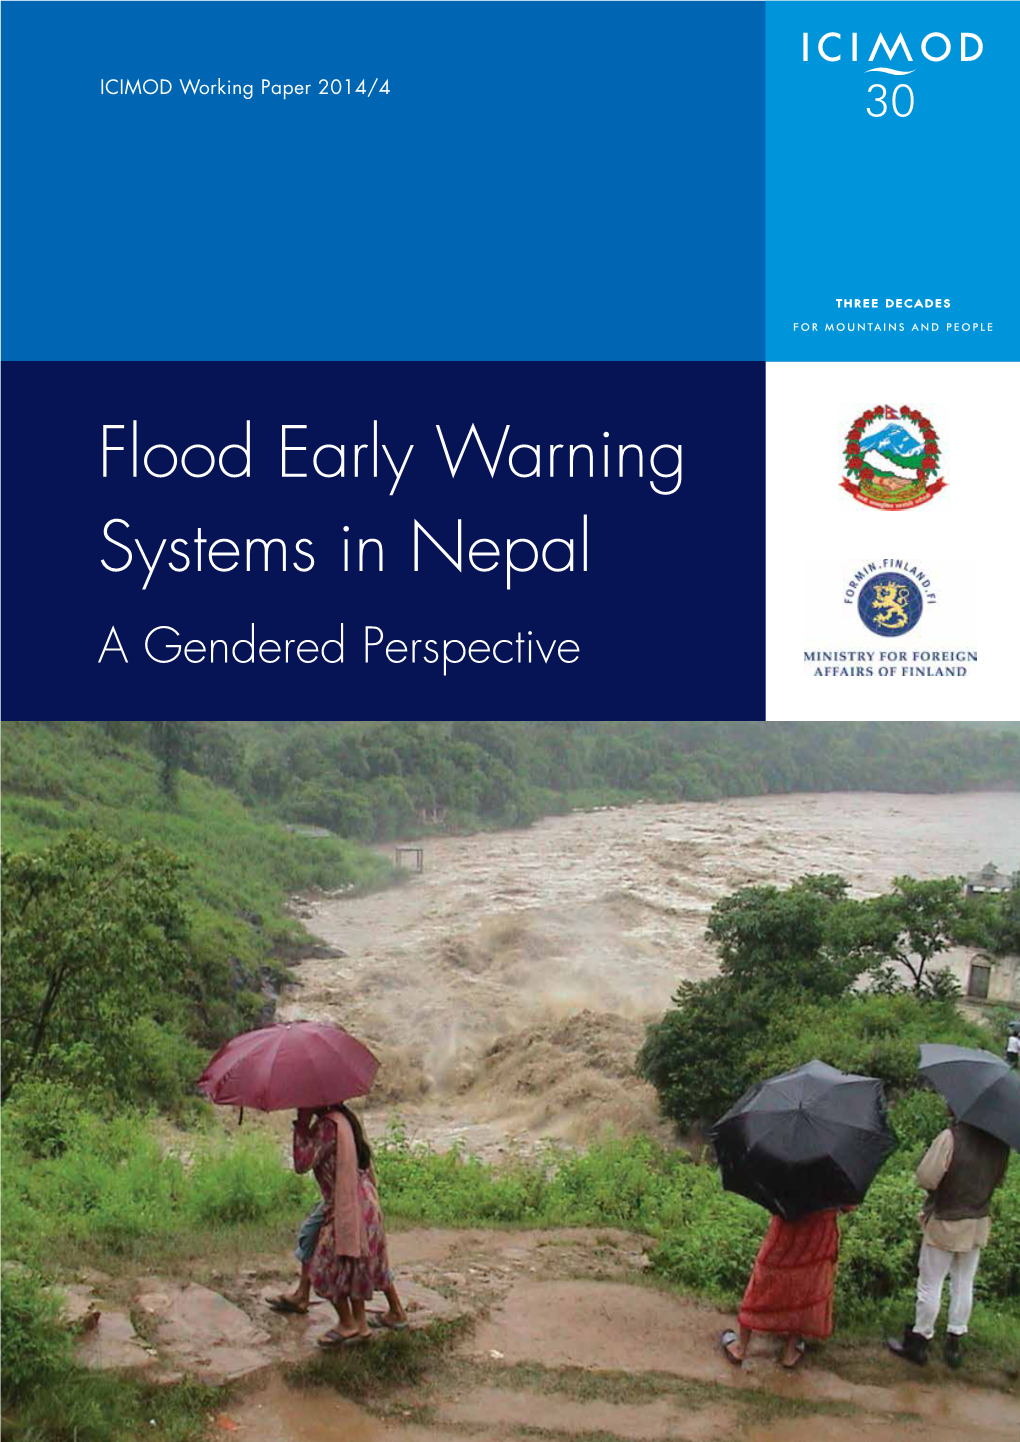 Flood Early Warning Systems in Nepal